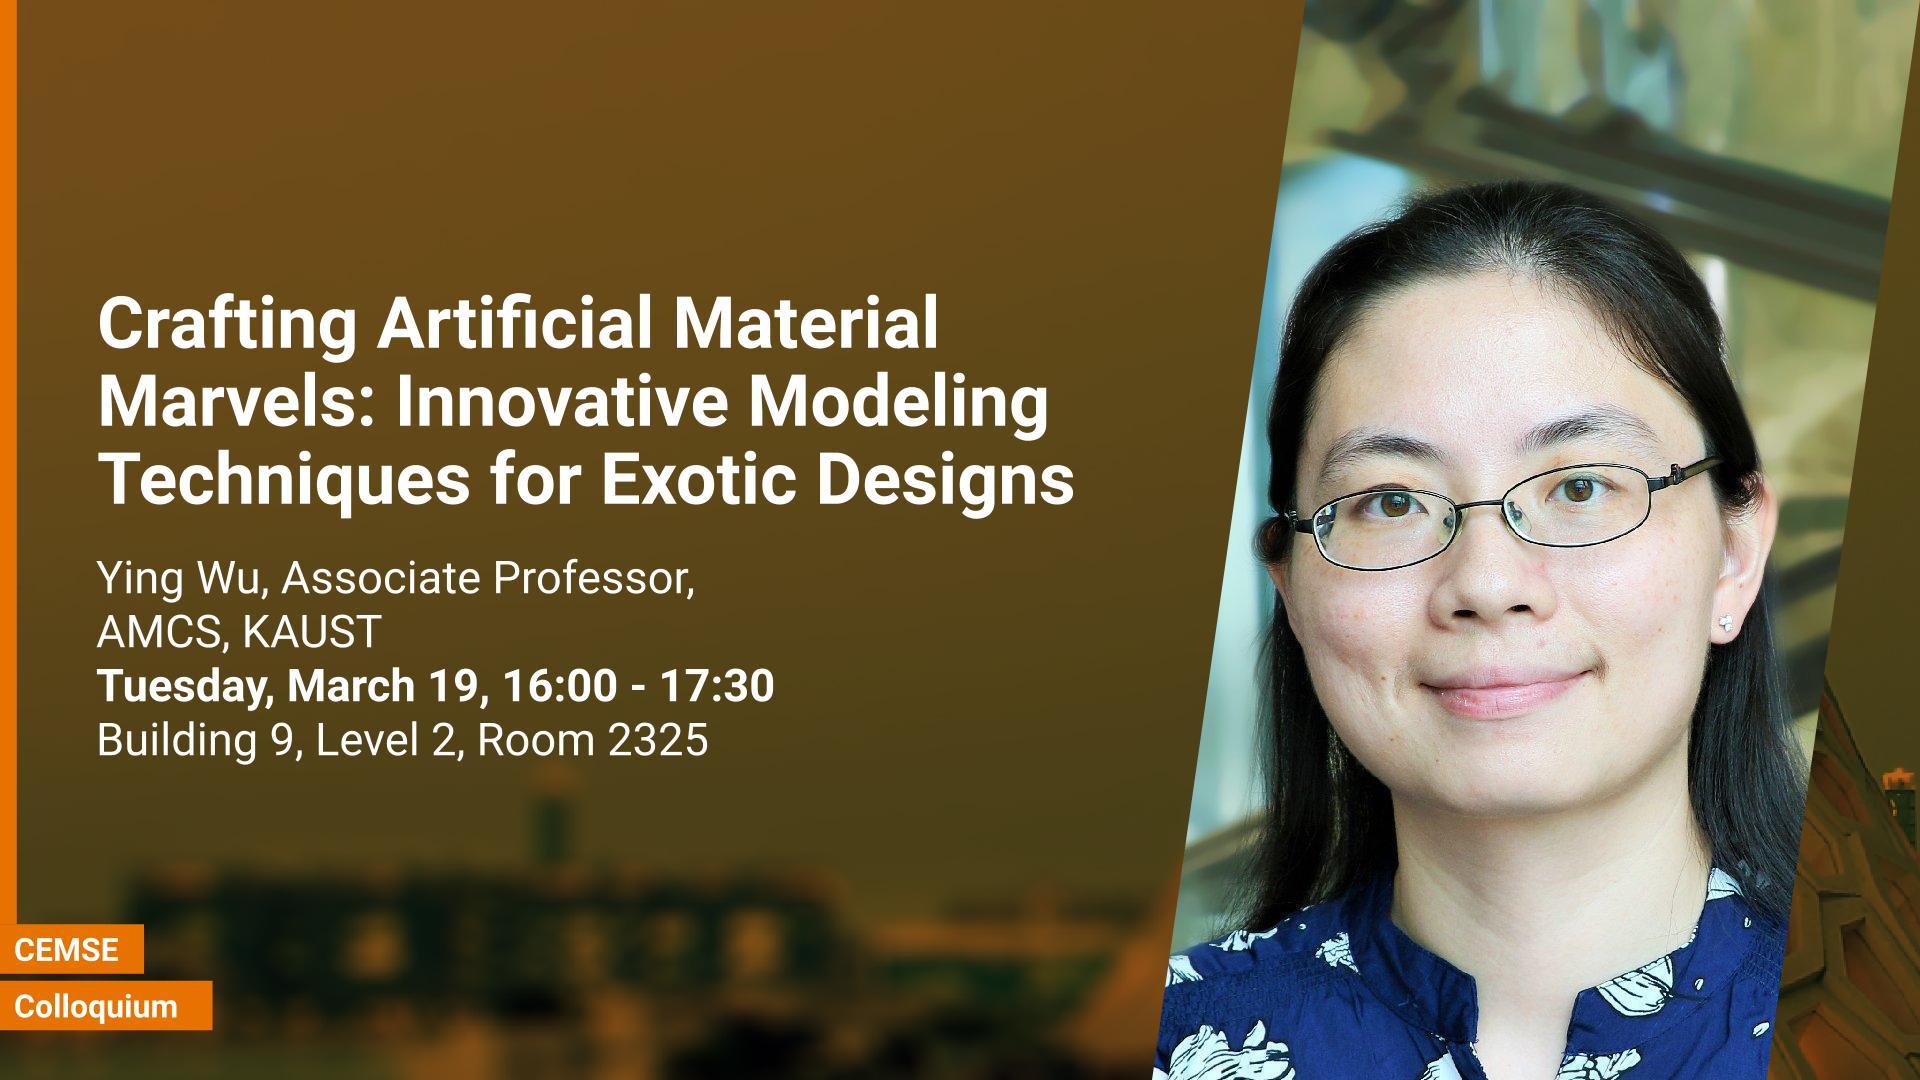 KAUST-CEMSE-AMCS-colloquium-Ying-Wu-Crafting Artificial Material Marvels_  Innovative Modeling Techniques for Exotic Designs (1).jpg